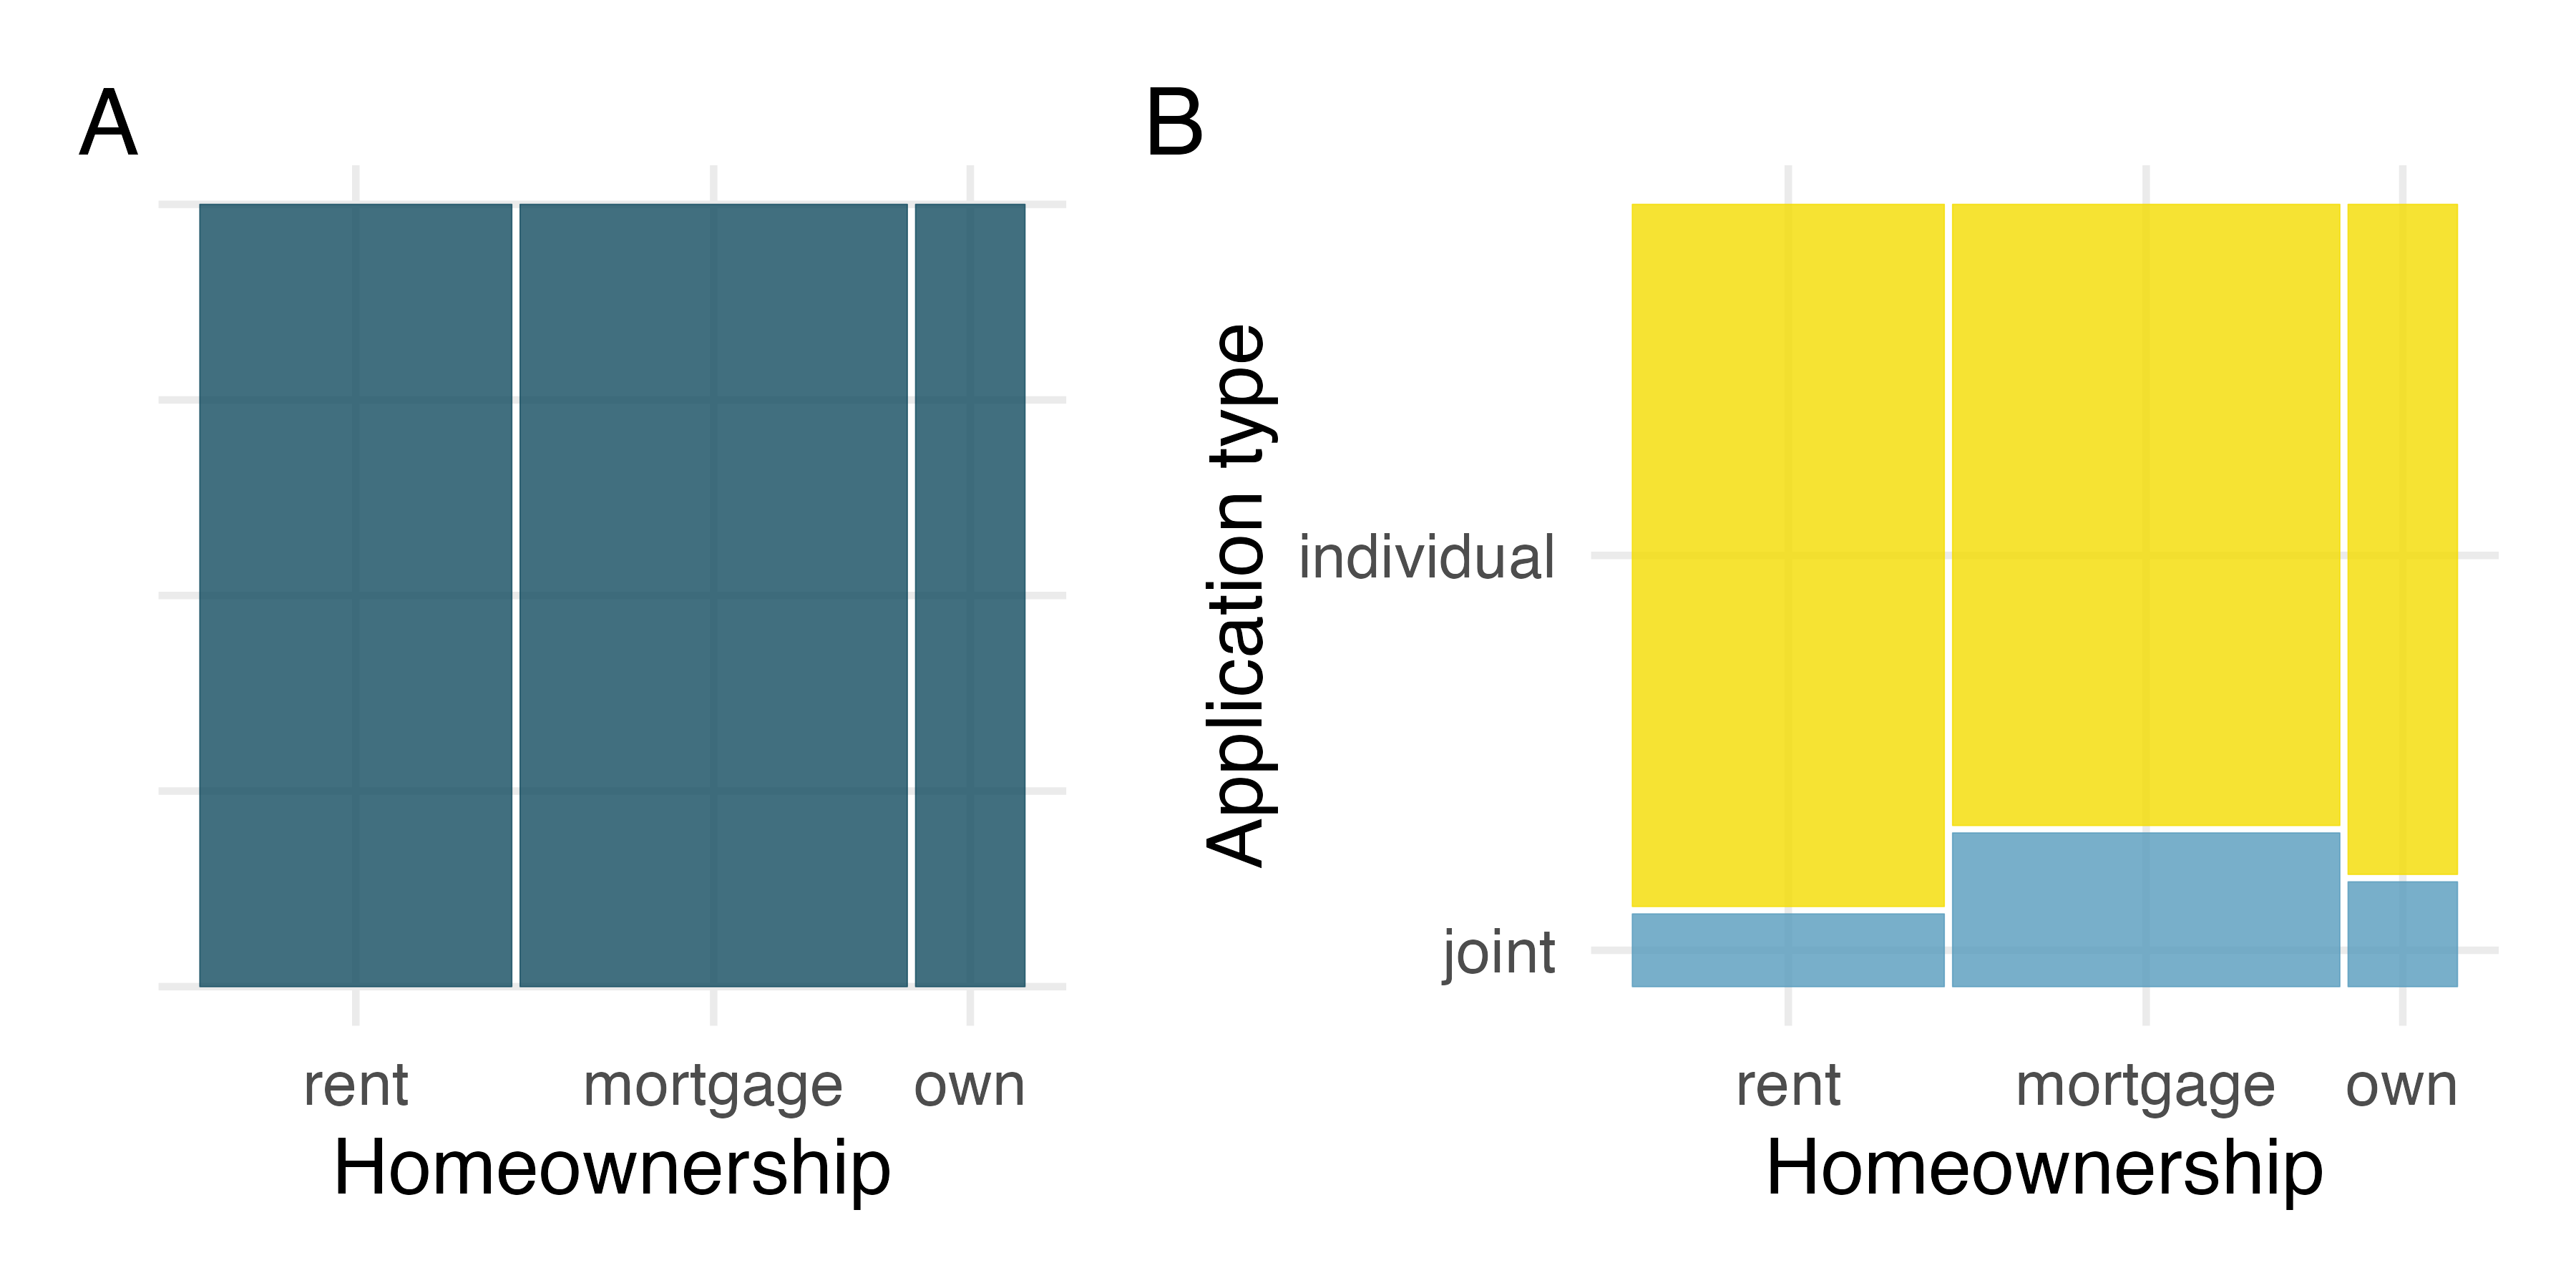 The mosaic plots: one for homeownership alone and the other displaying the relationship between homeownership and application type.